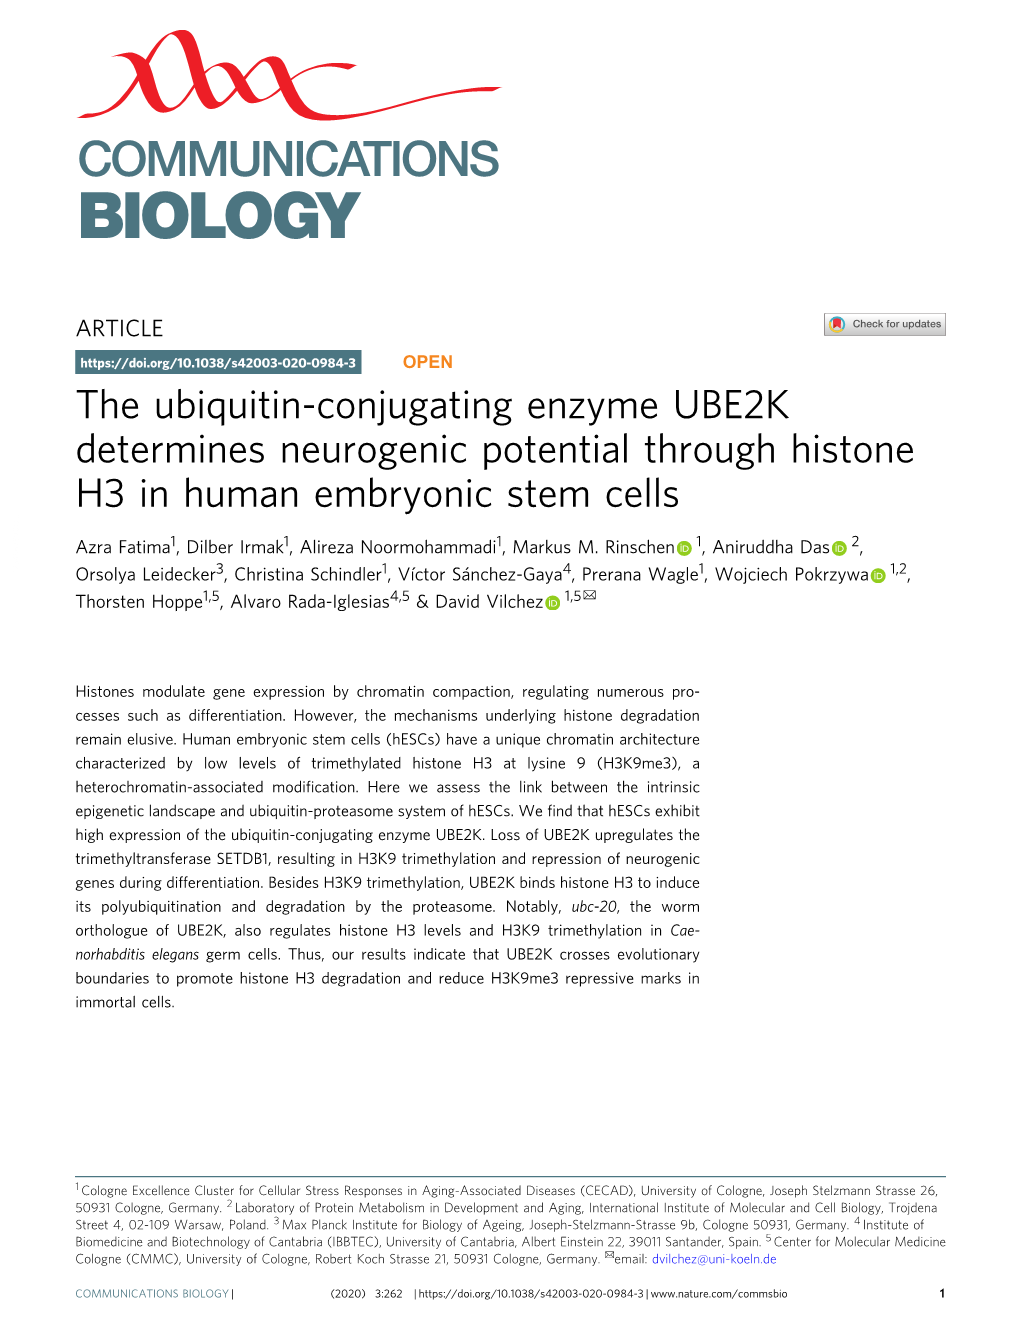 The Ubiquitin-Conjugating Enzyme UBE2K Determines Neurogenic Potential Through Histone H3 in Human Embryonic Stem Cells